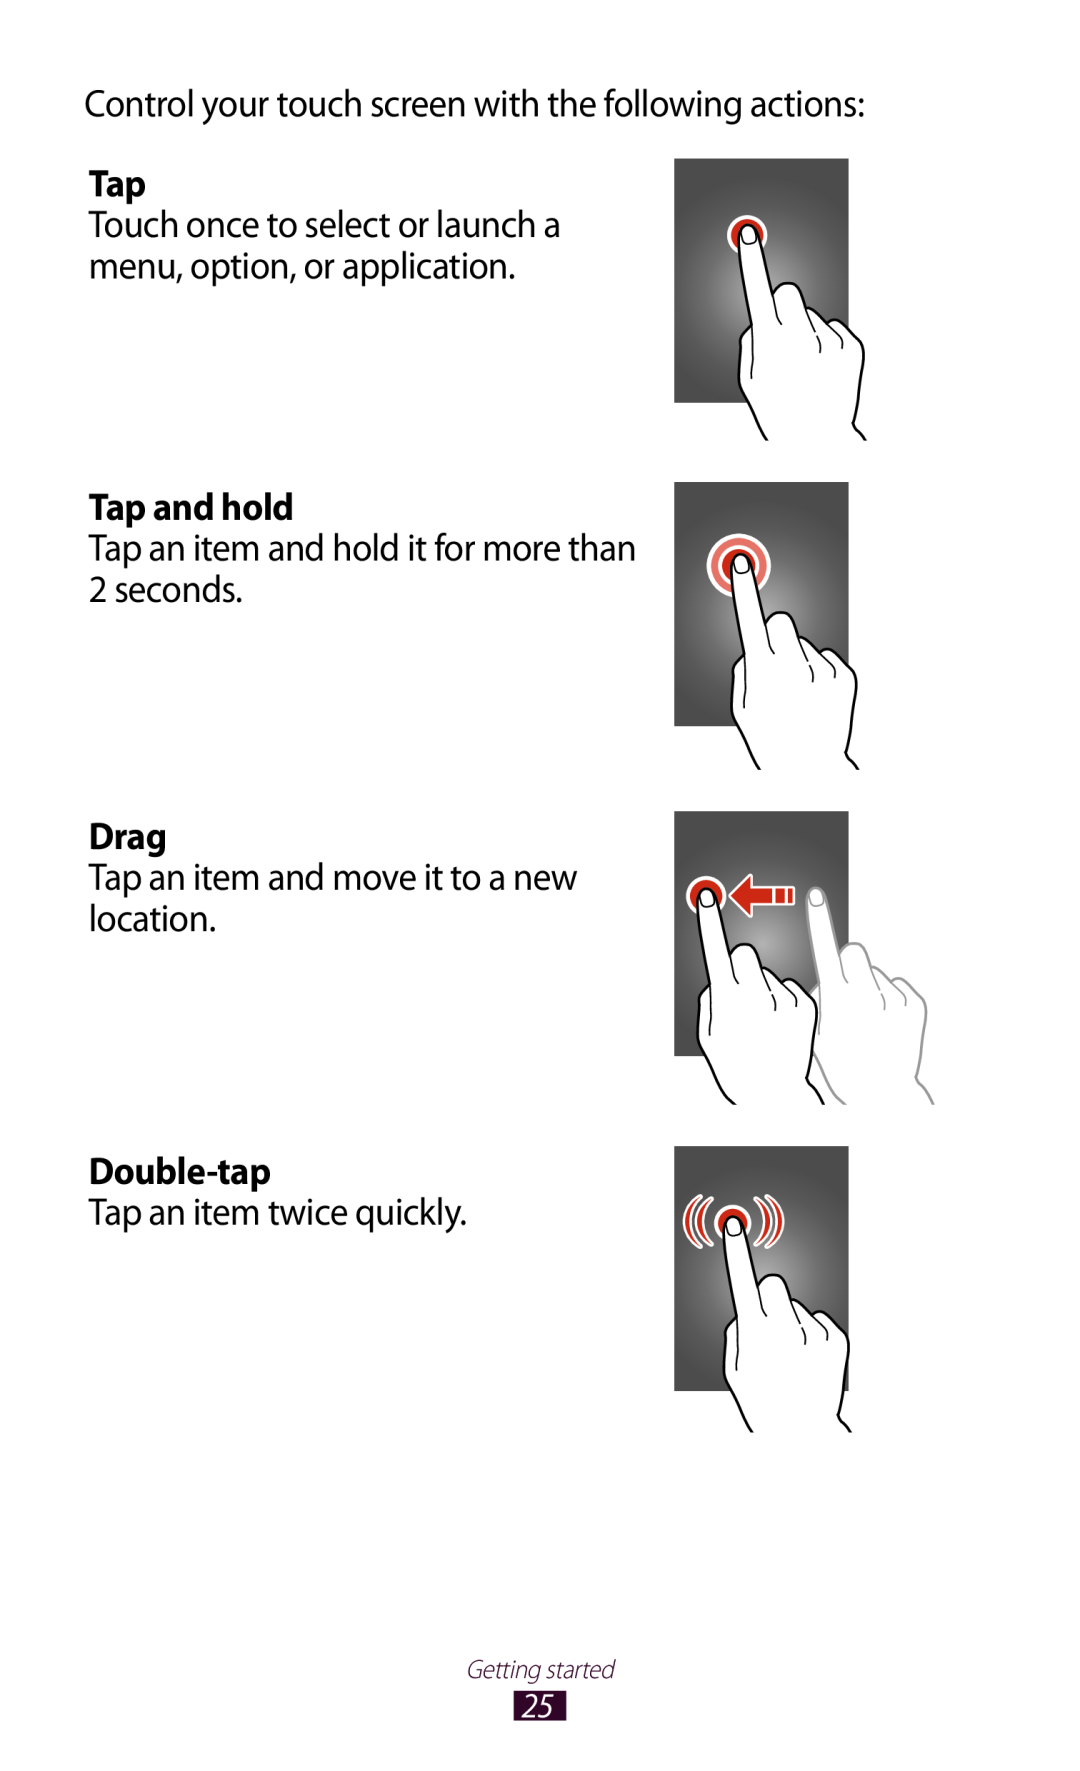 Samsung GT-S7560UWATIM manual Control your touch screen with the following actions, Tap and hold, Drag, Double-tap 